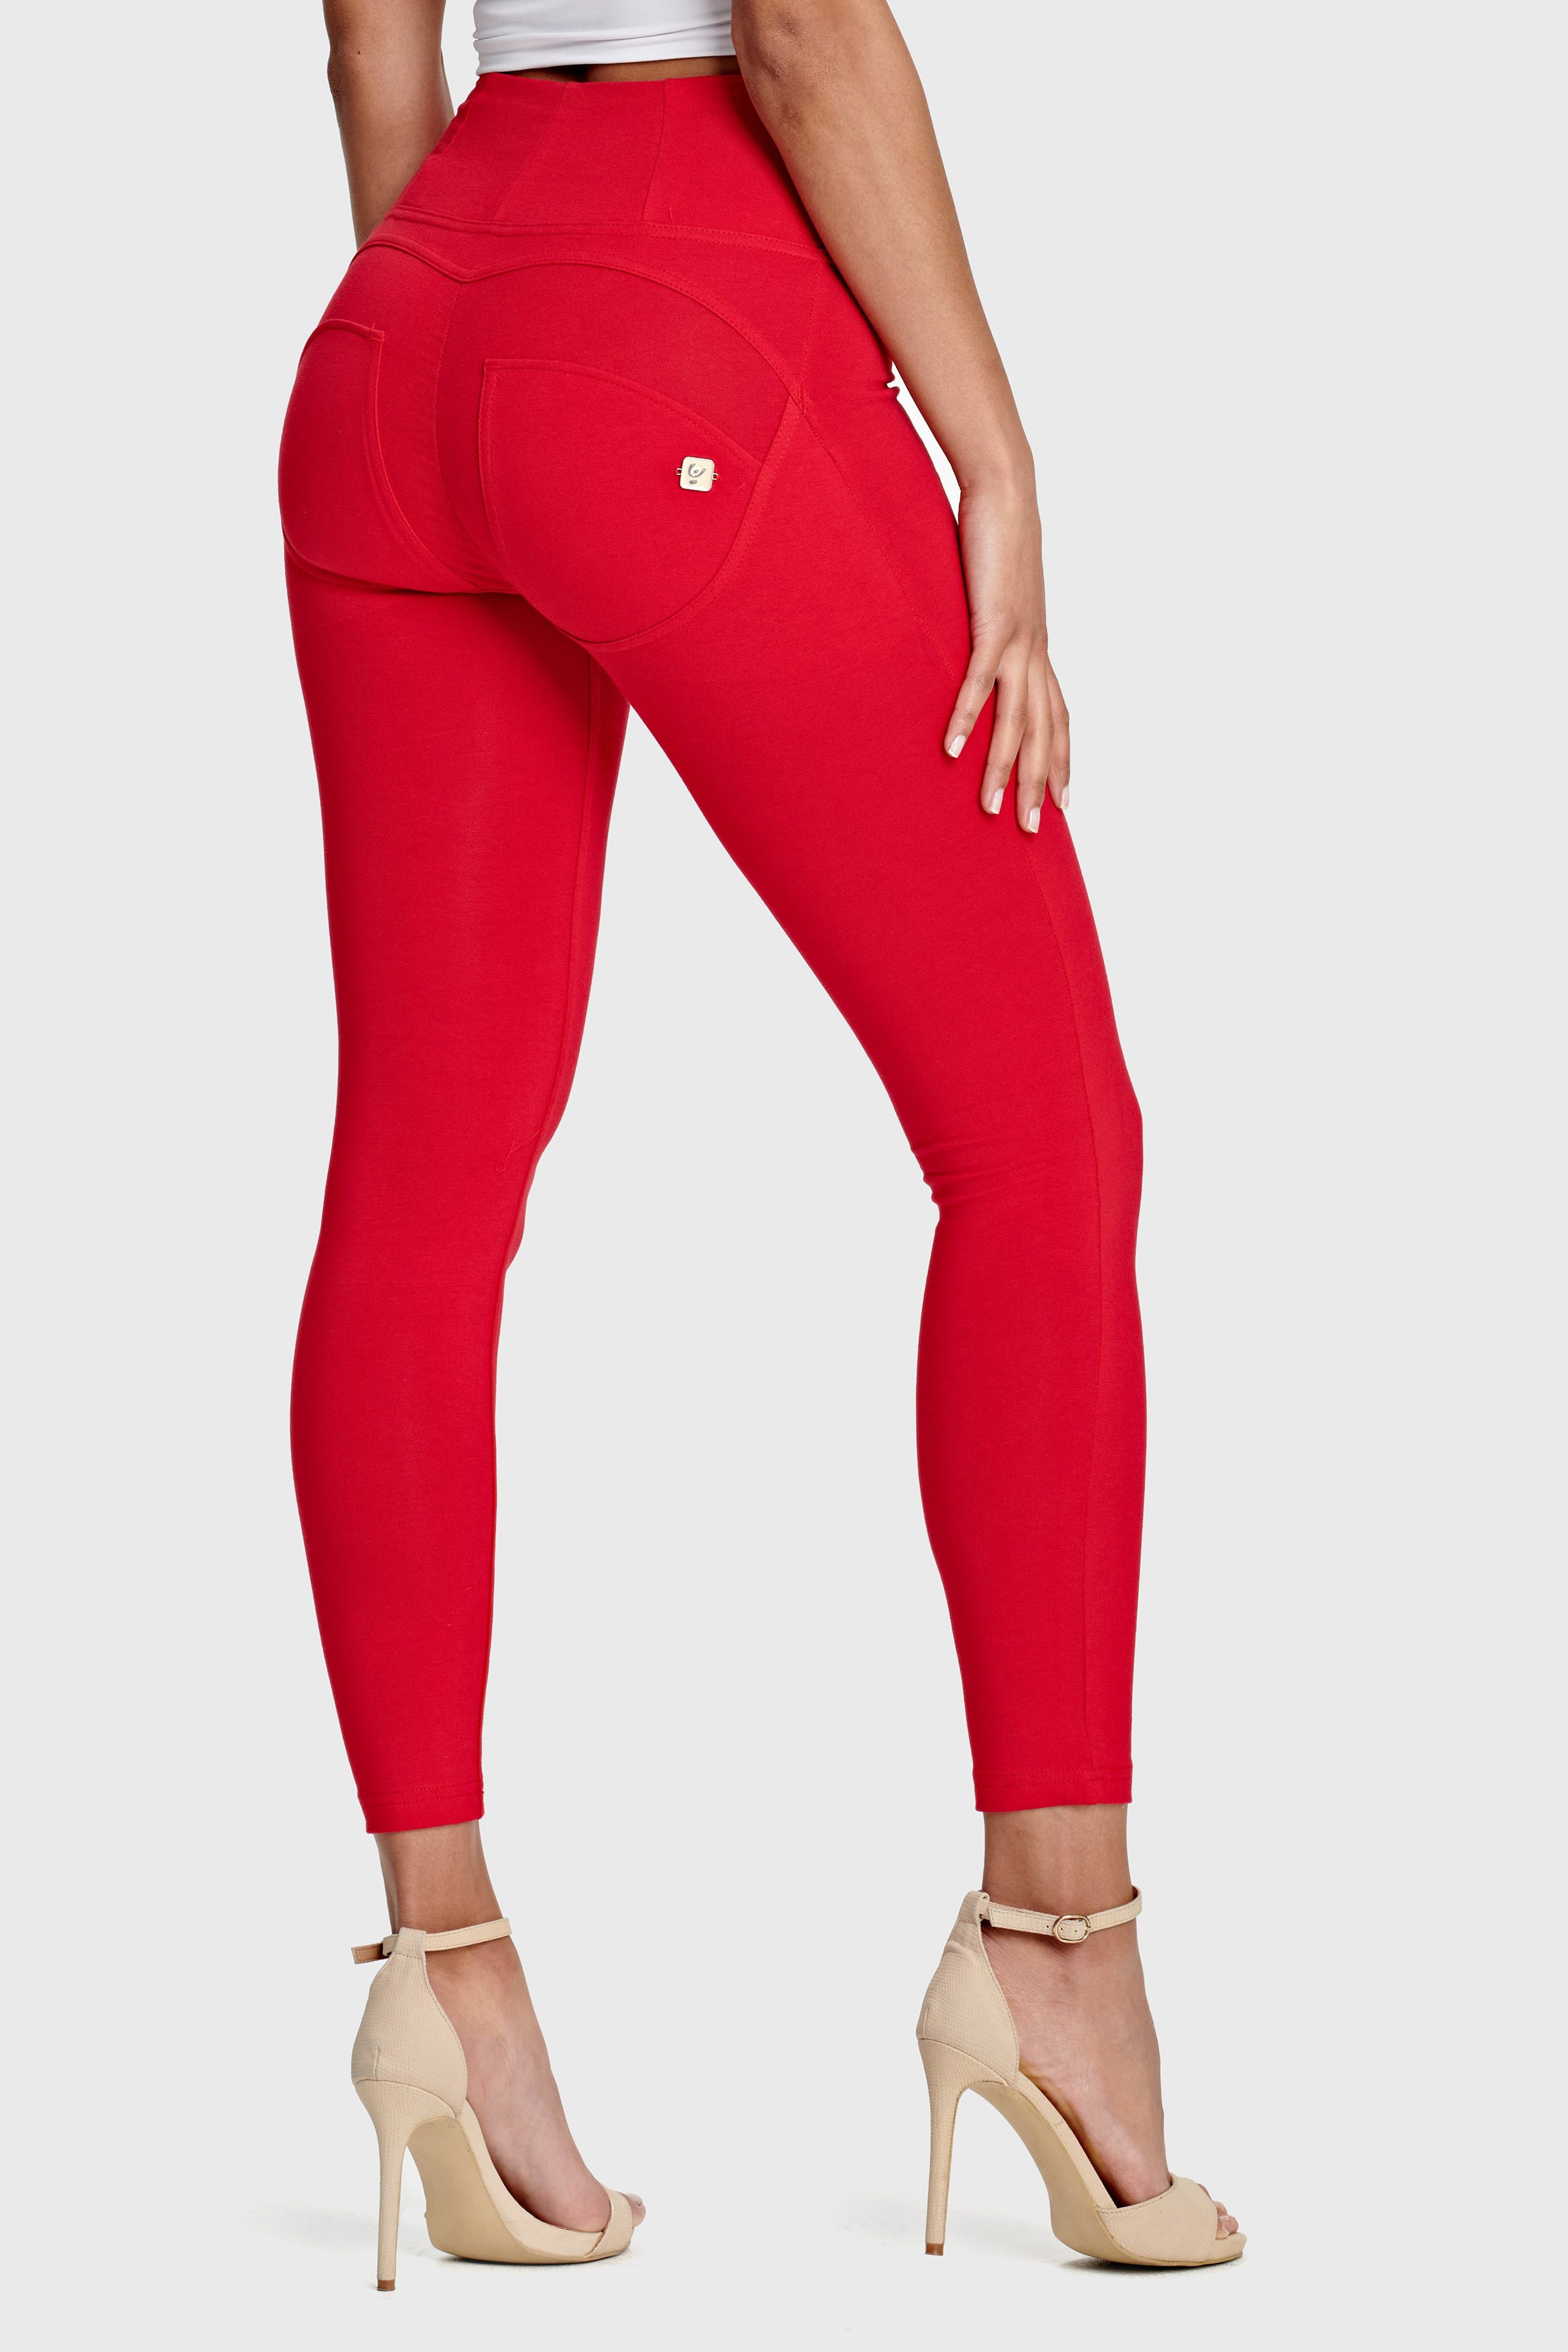 Red Leggings for Women, Shop Mid-rise & High-waisted